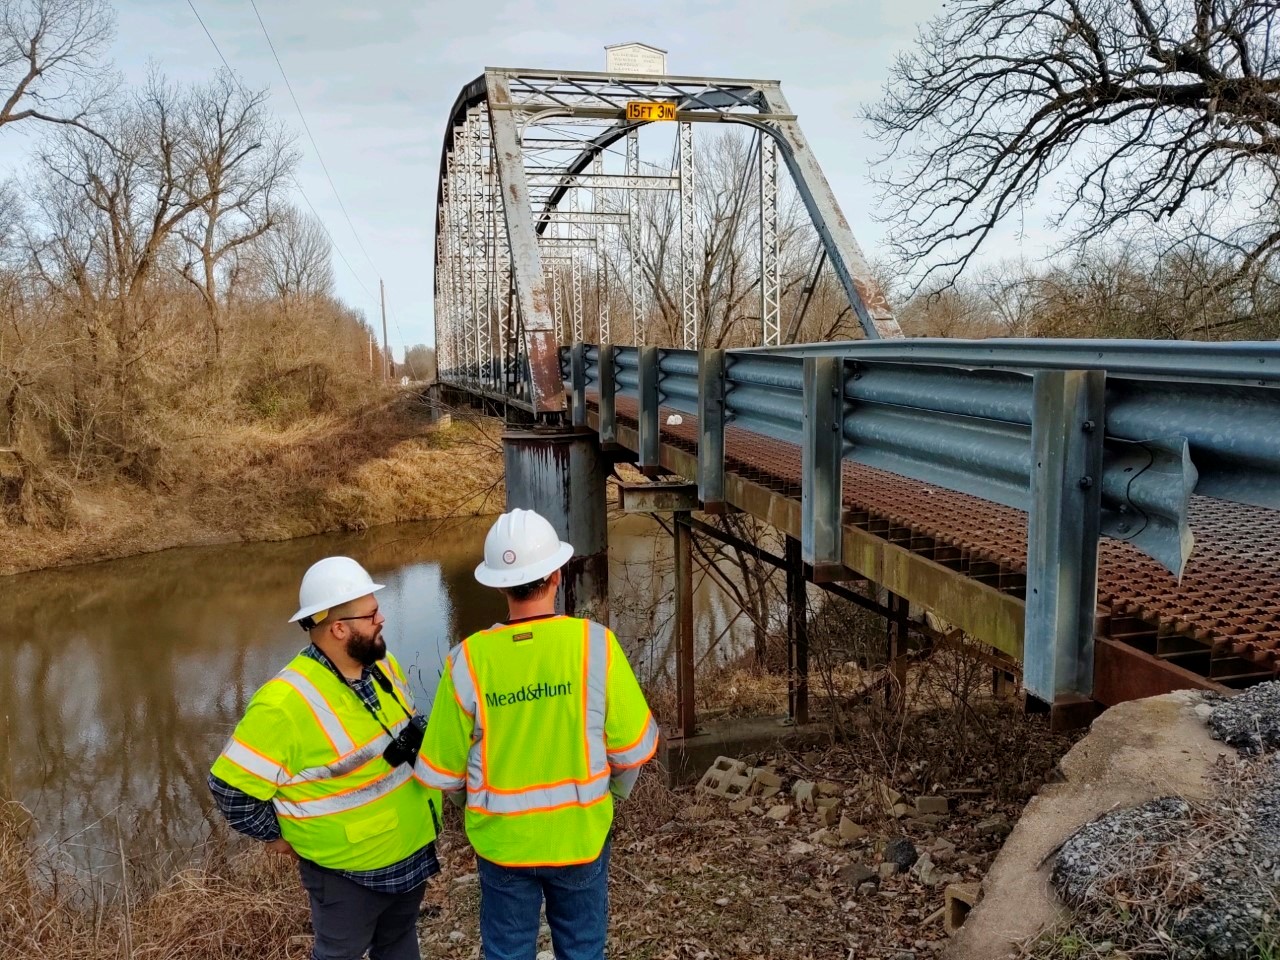 A photograph of two workers looking at the under structure of a bridge that stretches over a river.